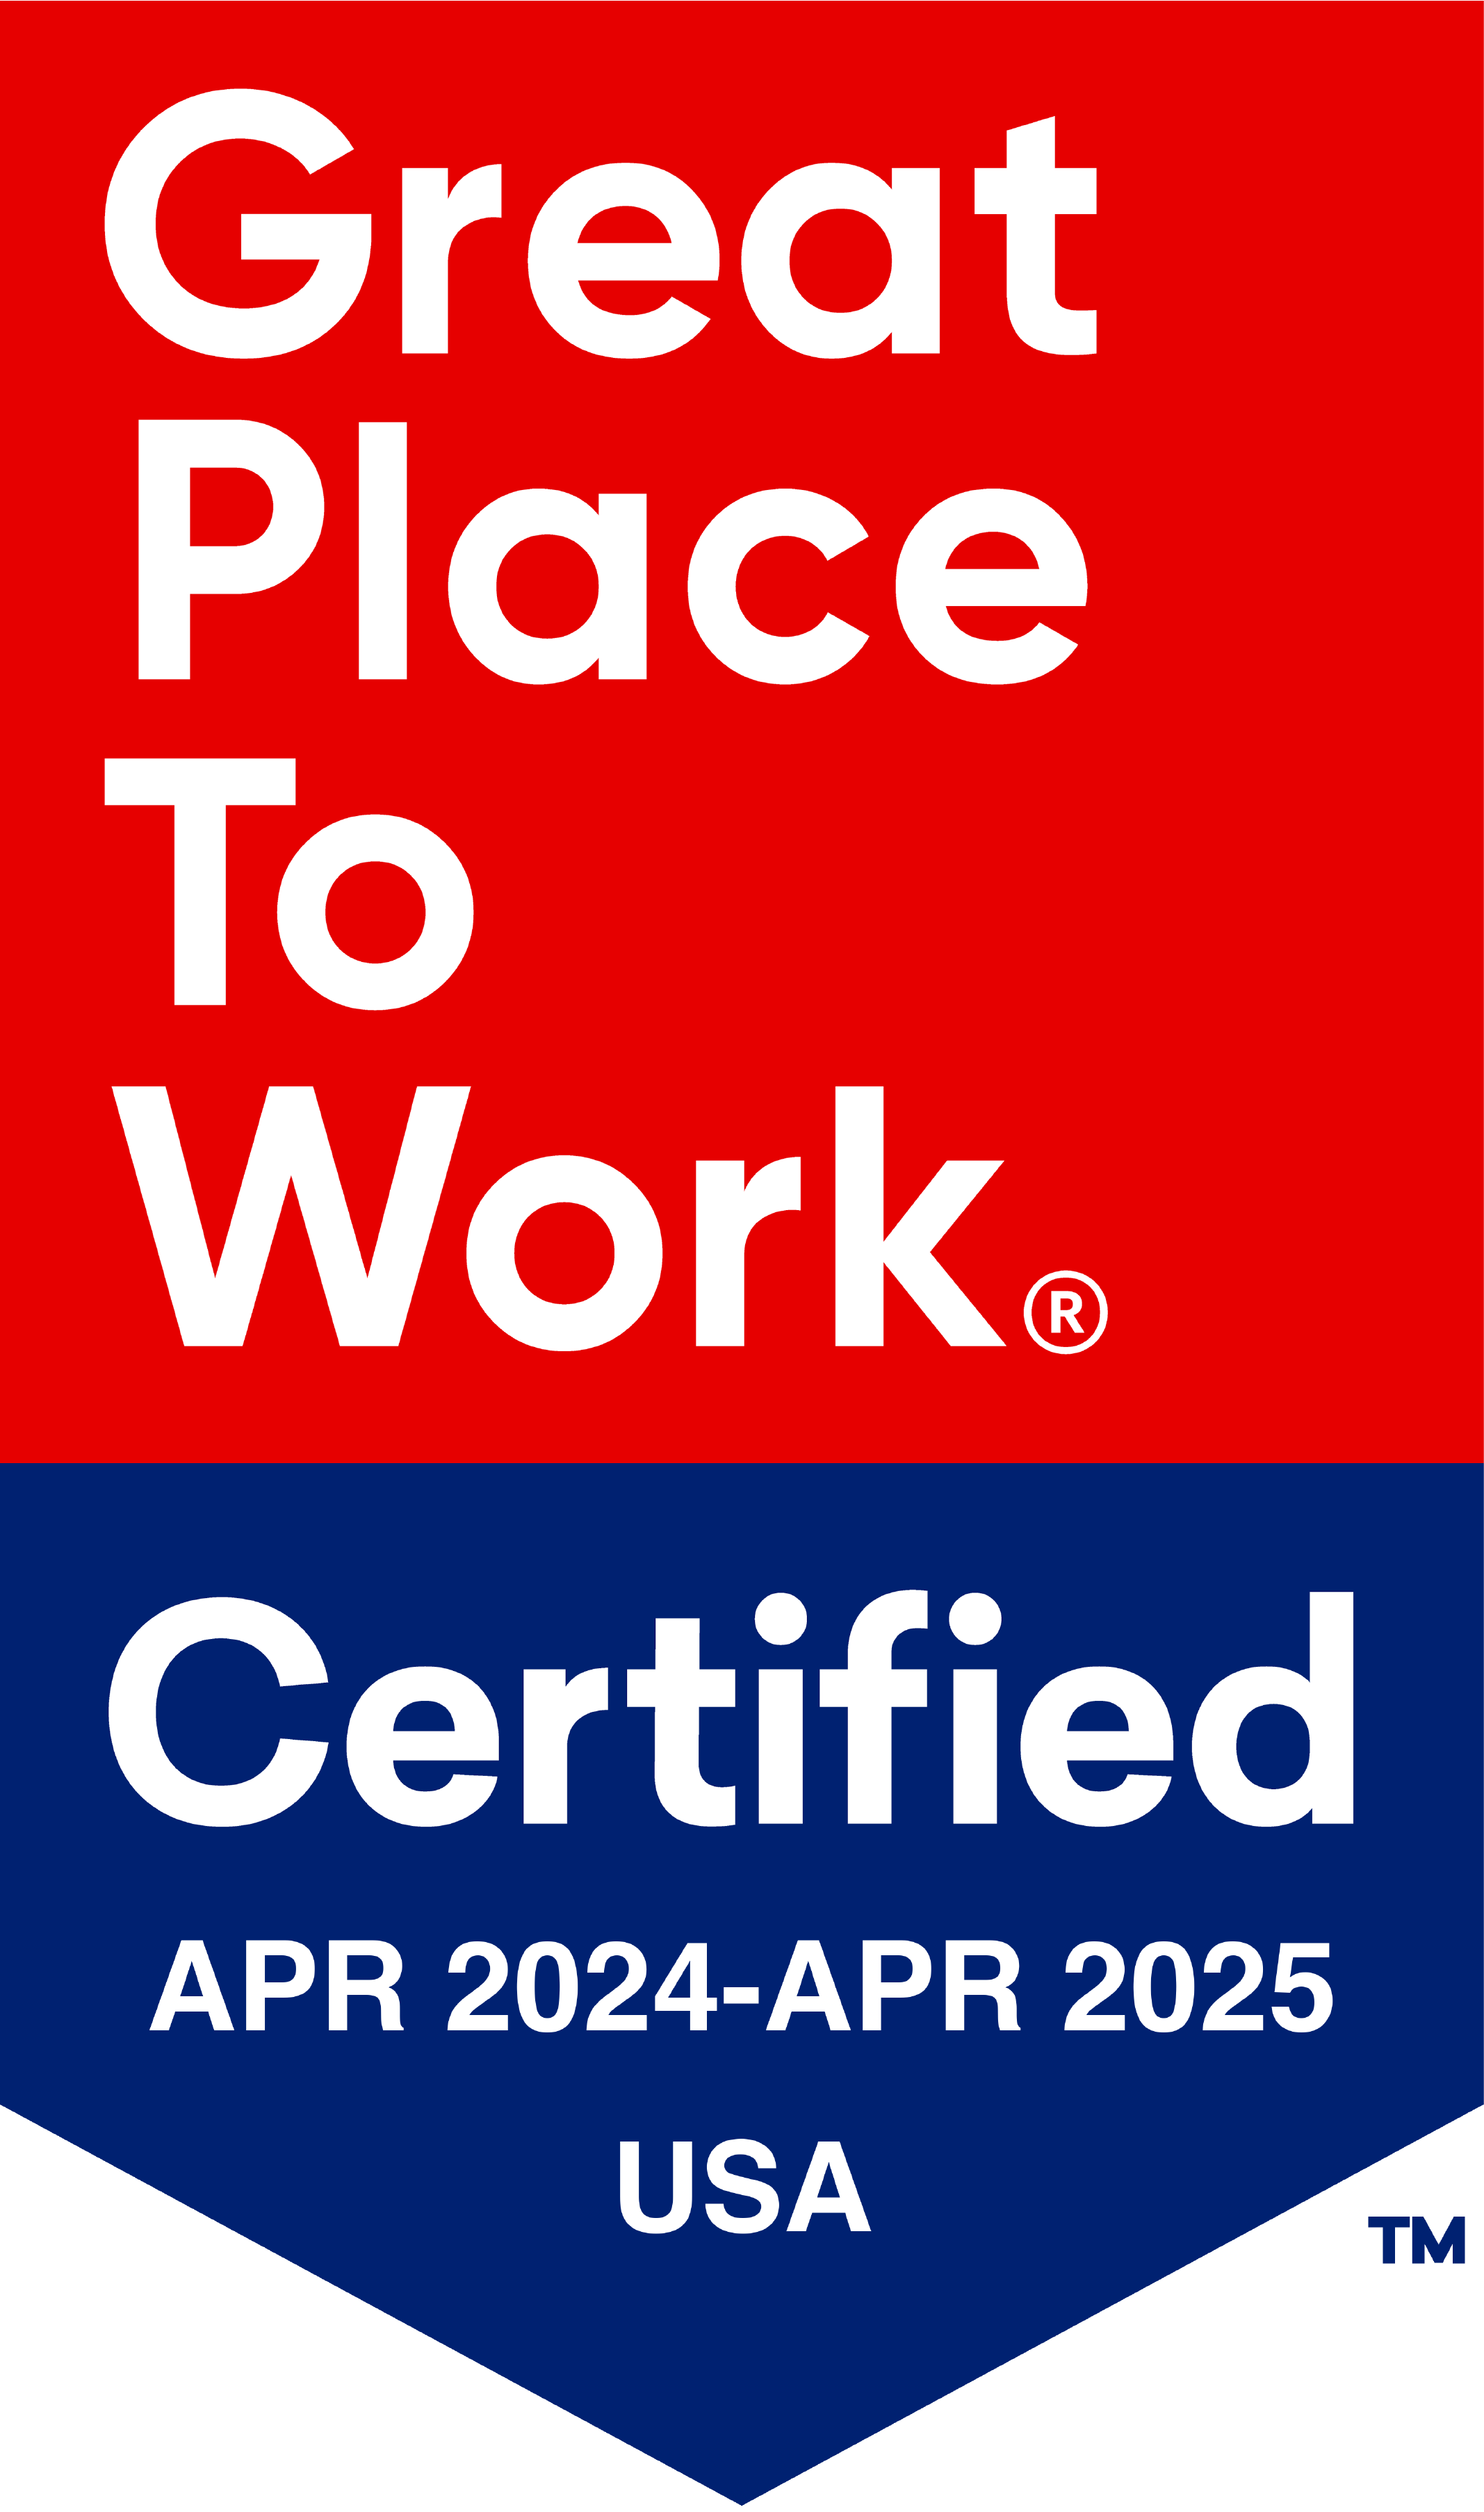 Great Places to Work® Certified April 2024 - April 2025